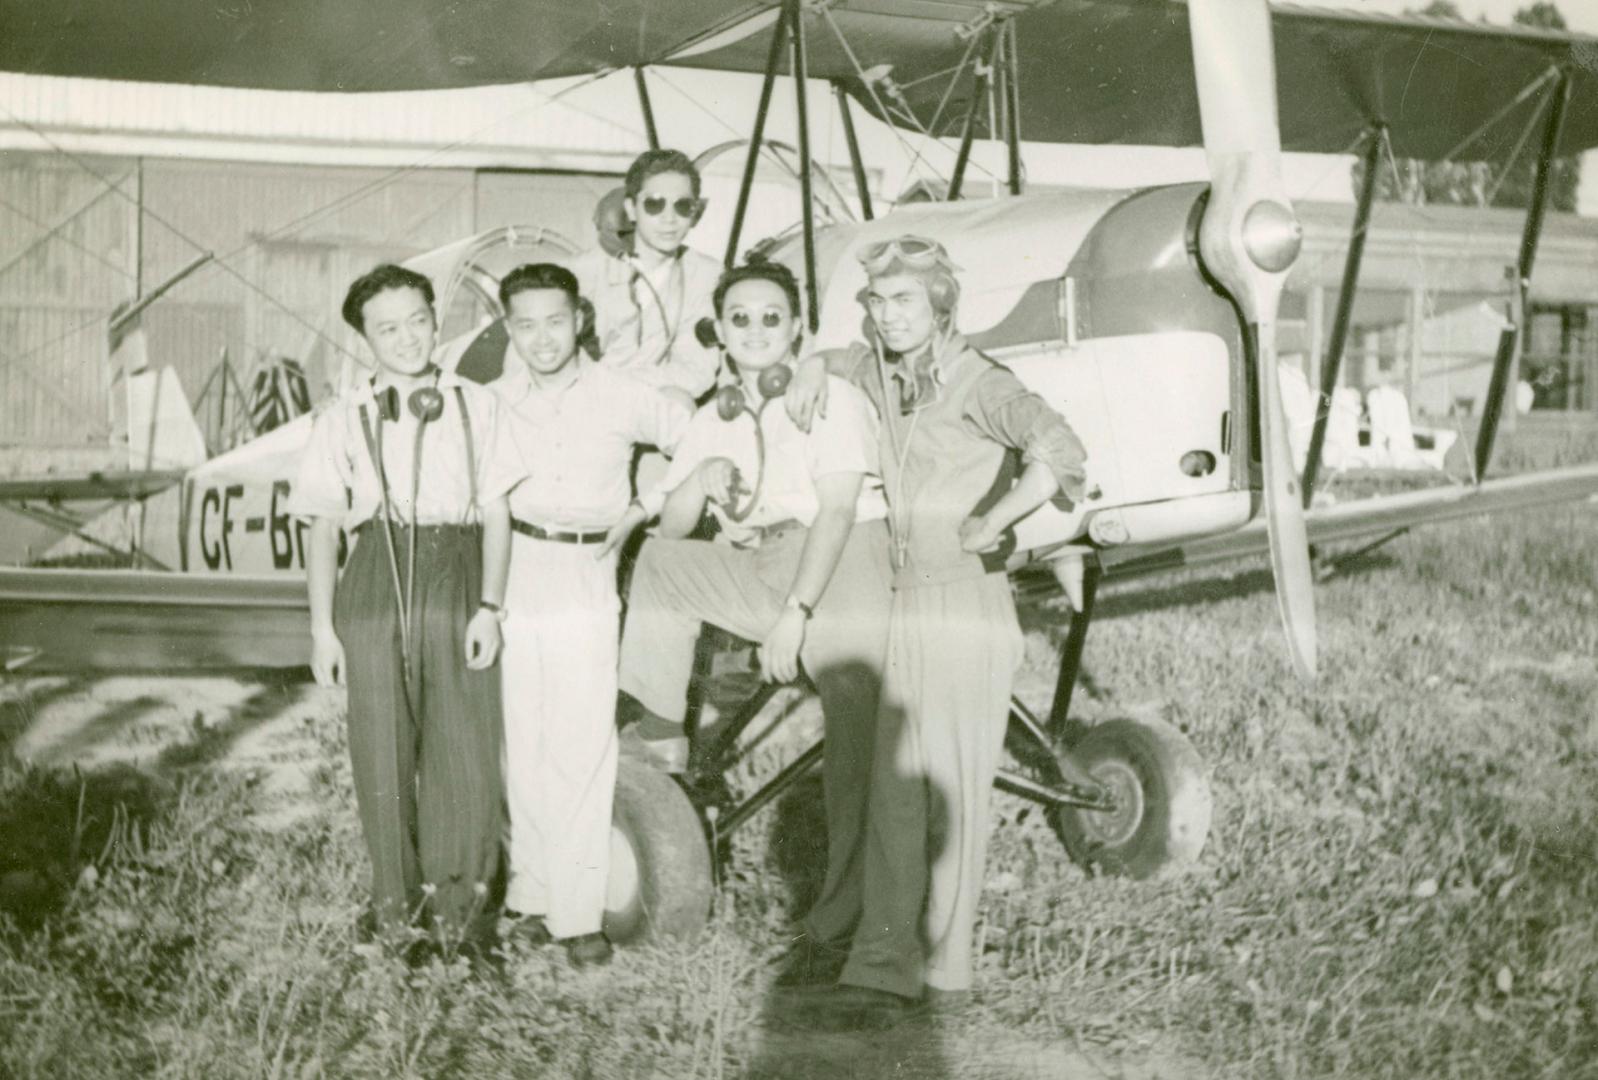 Robert Wong and Chinese student pilots pose in front of an aircraft